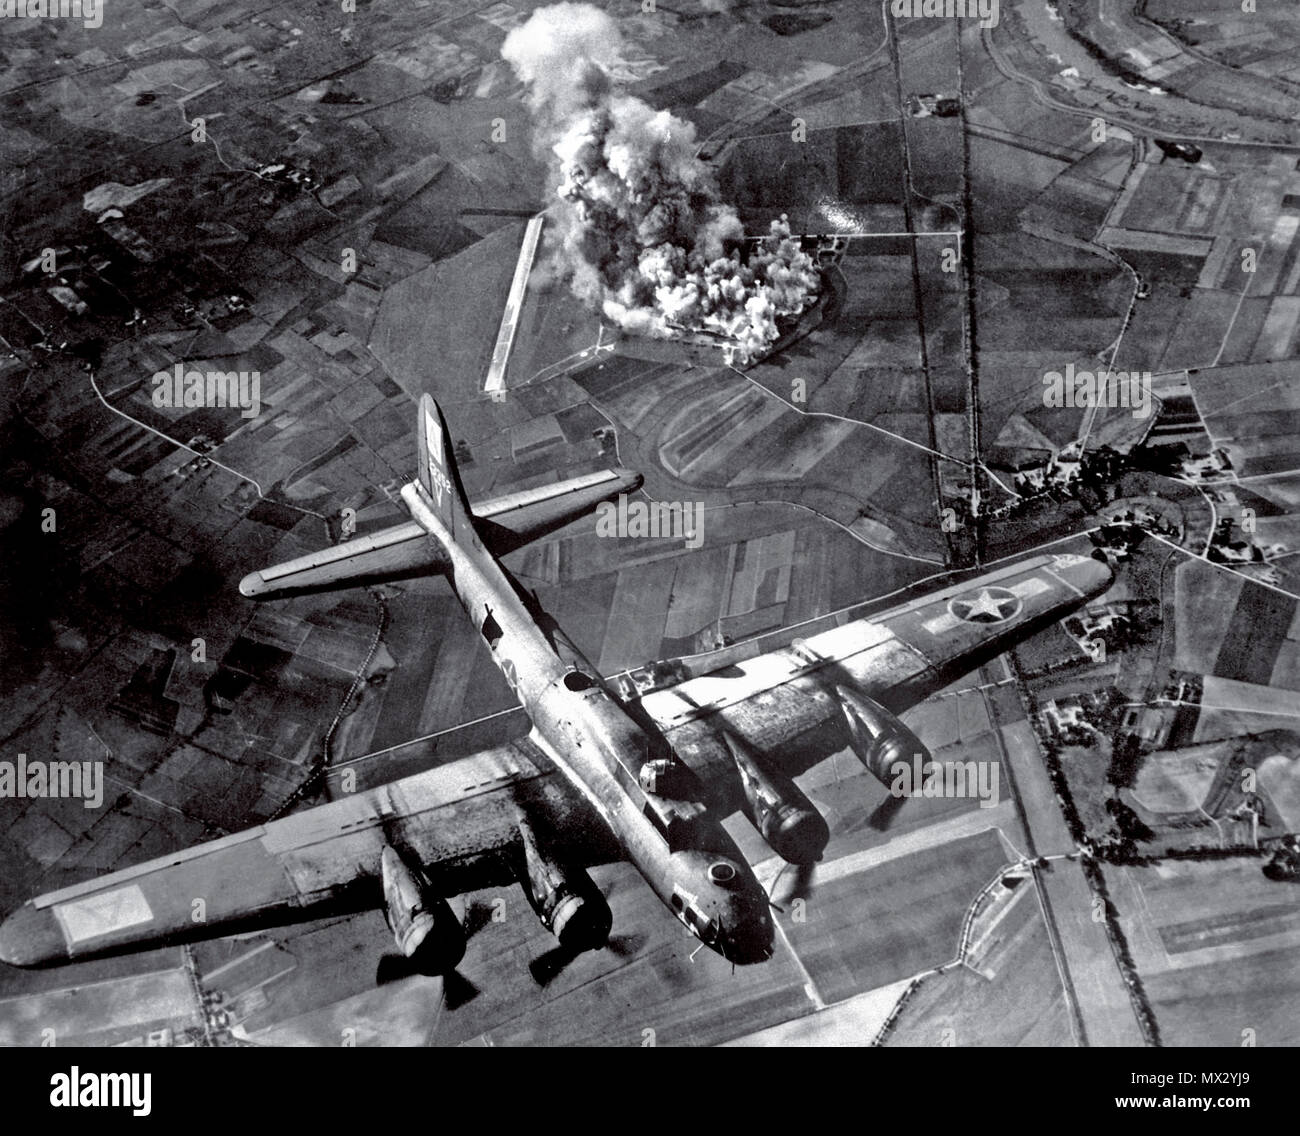 BOMBING B-17 Germany WW2  1940’s Bombing Raid by a B-17 Flying Fortress of the American 8th Air Force on a Focke Wulf aircraft manufacturing plant at Marienburg Germany 1943. This notable World War II aerial bombing raid was a total success obliterating the plant completely with pinpoint bombing Stock Photo